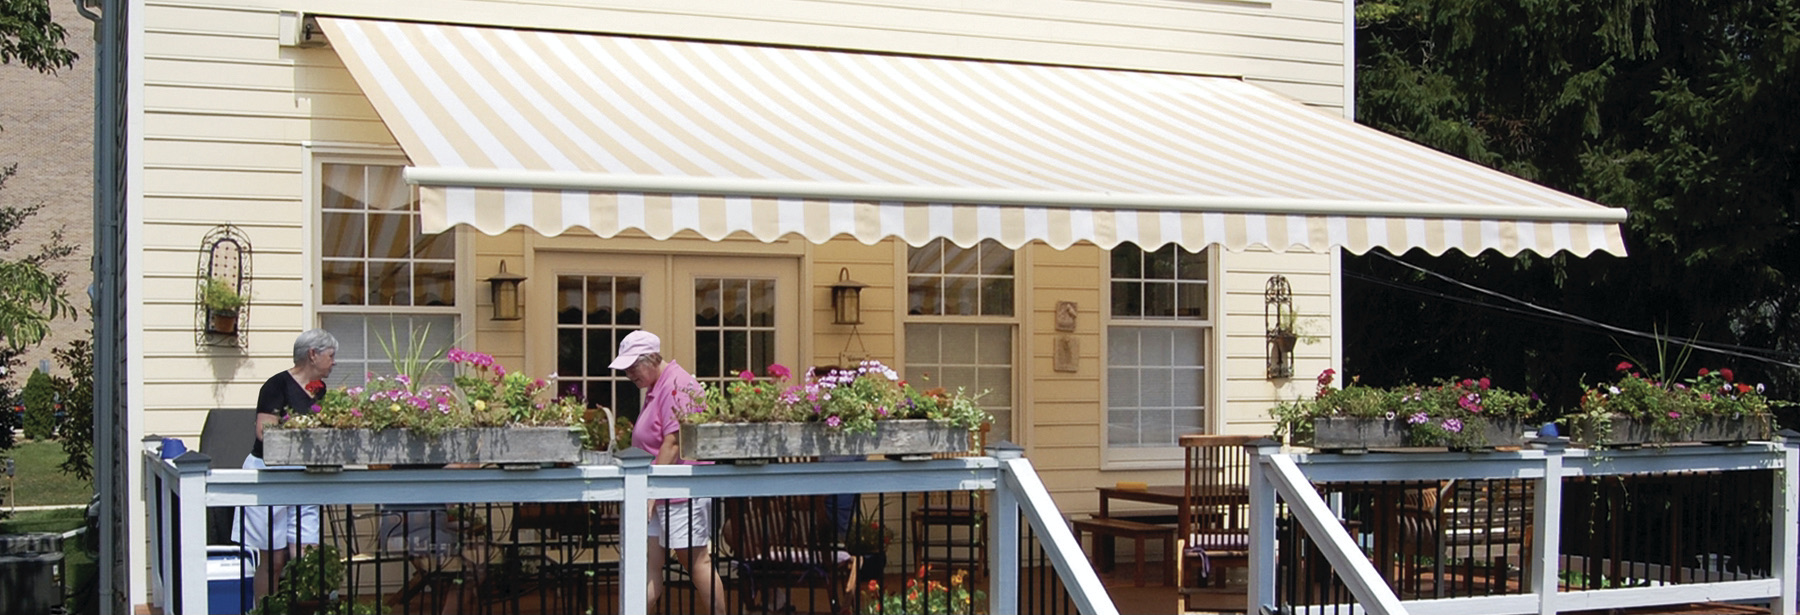 Awnings Installation Madison WI Retractable Shades